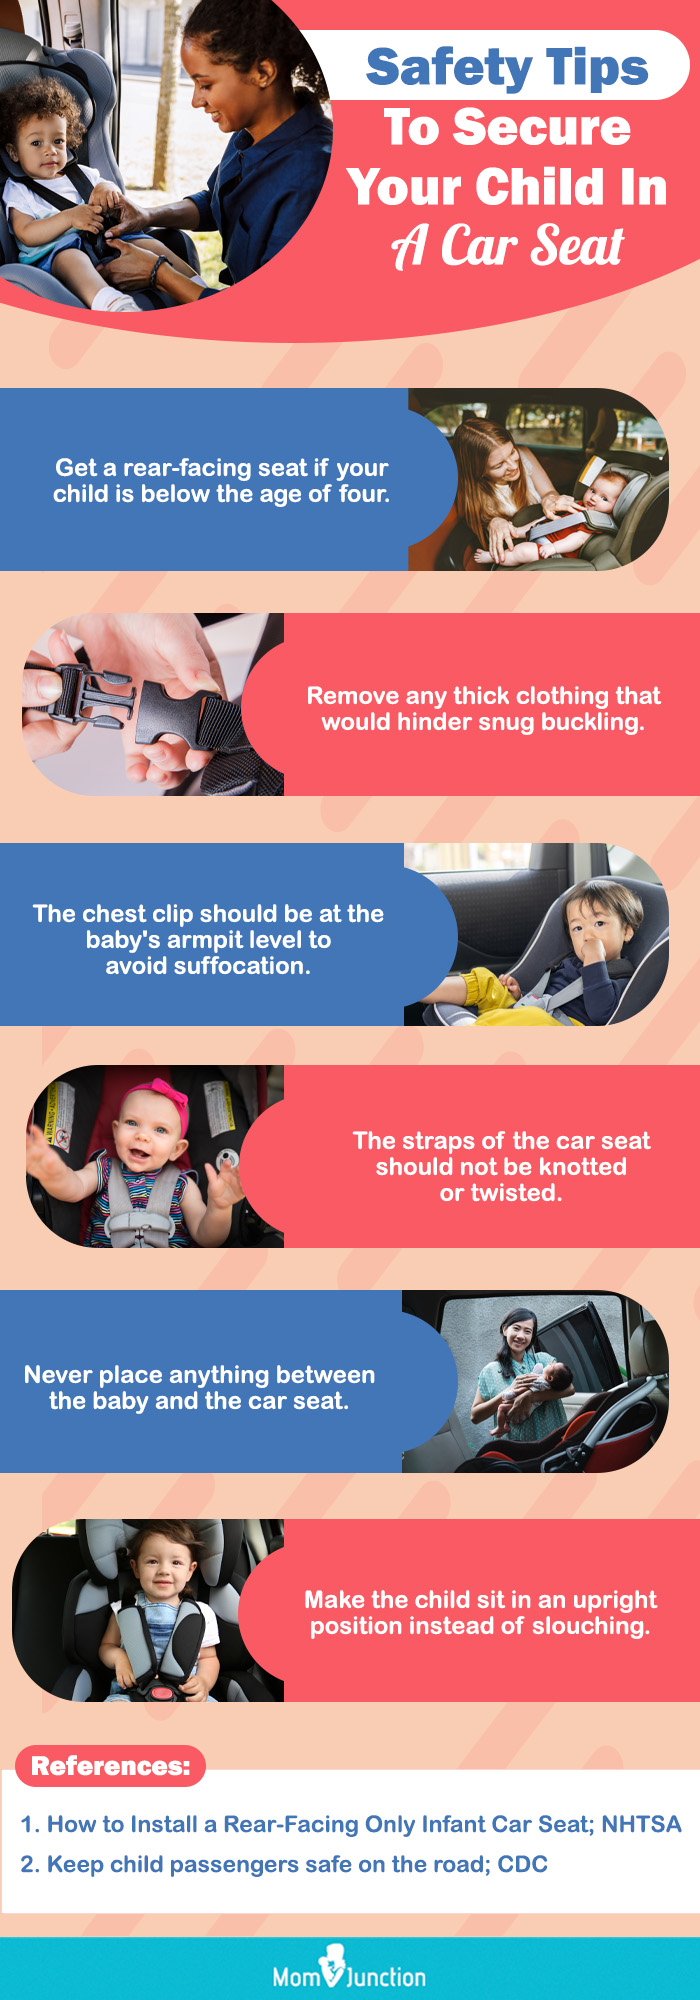 Safety Tips To Secure Your Child In A Car Seat (infographic)